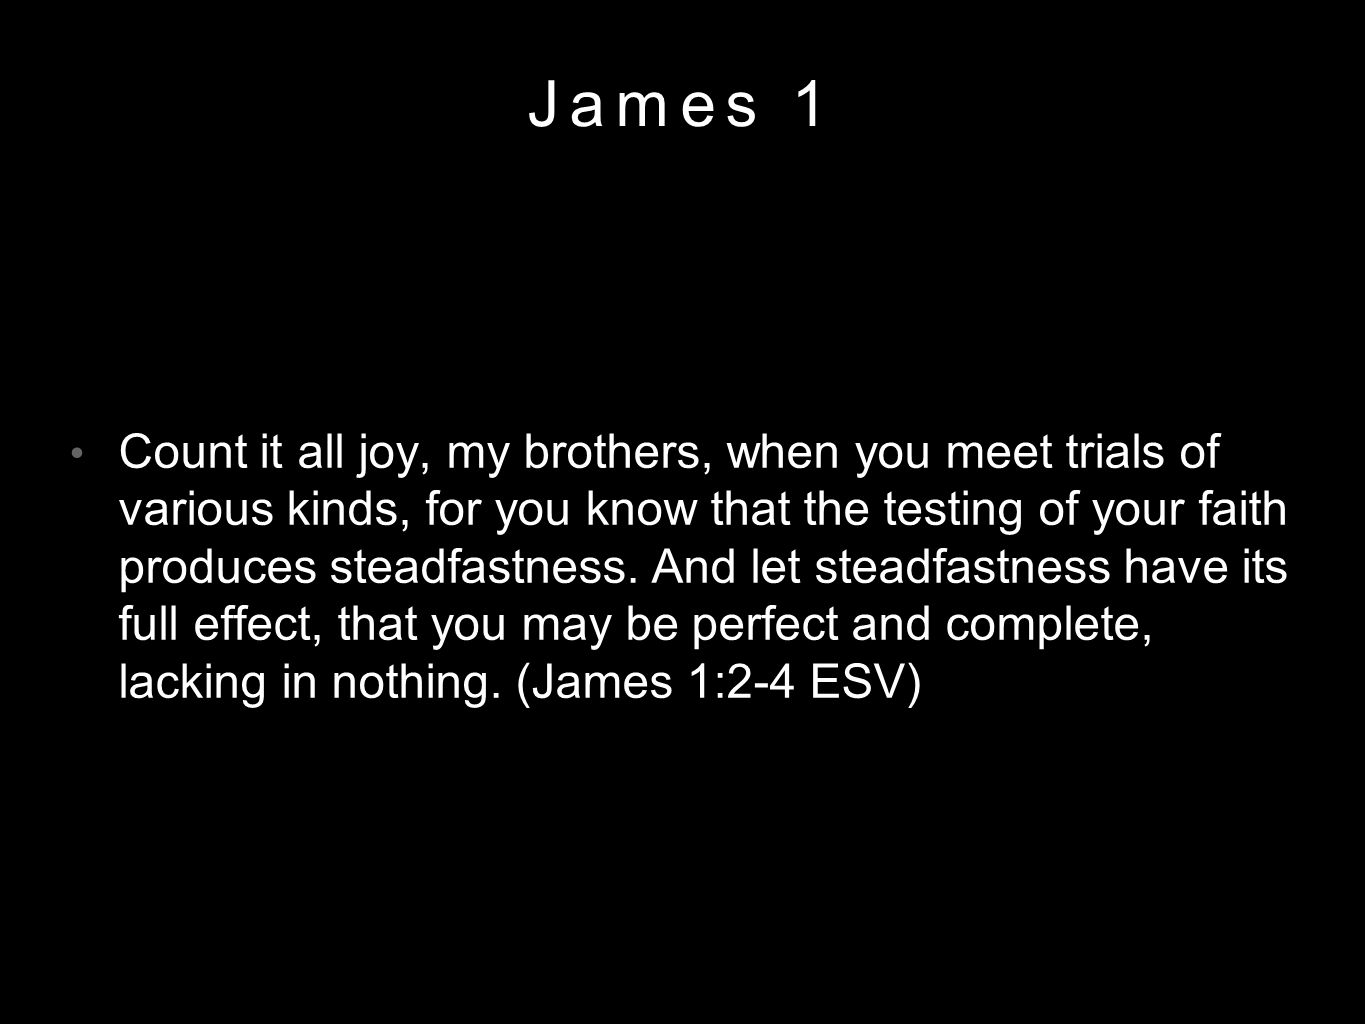 James 1 Count it all joy, my brothers, when you meet trials of various kinds, for you know that the testing of your faith produces steadfastness.